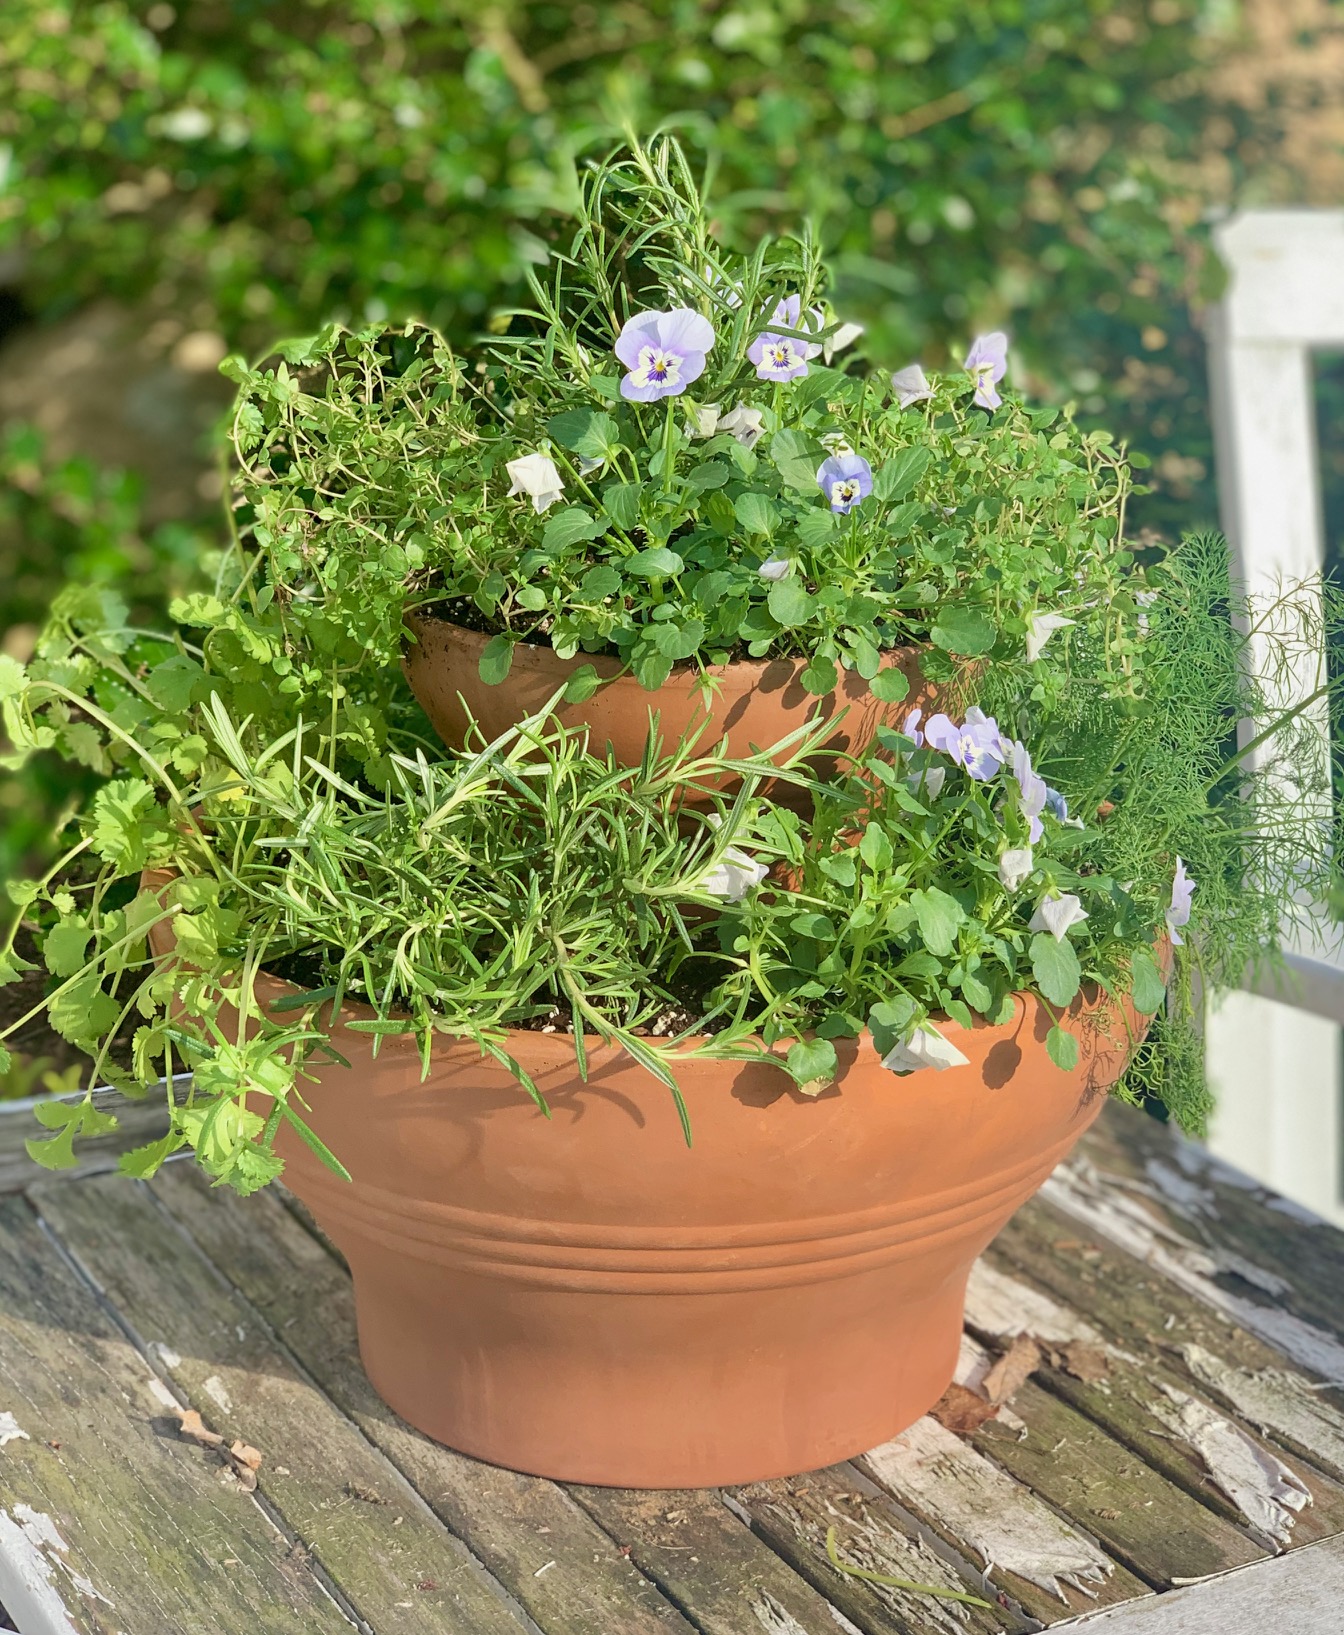 12 Best Herb Garden Plants: Expert Insights for Caring and Harvesting the Finest Plants